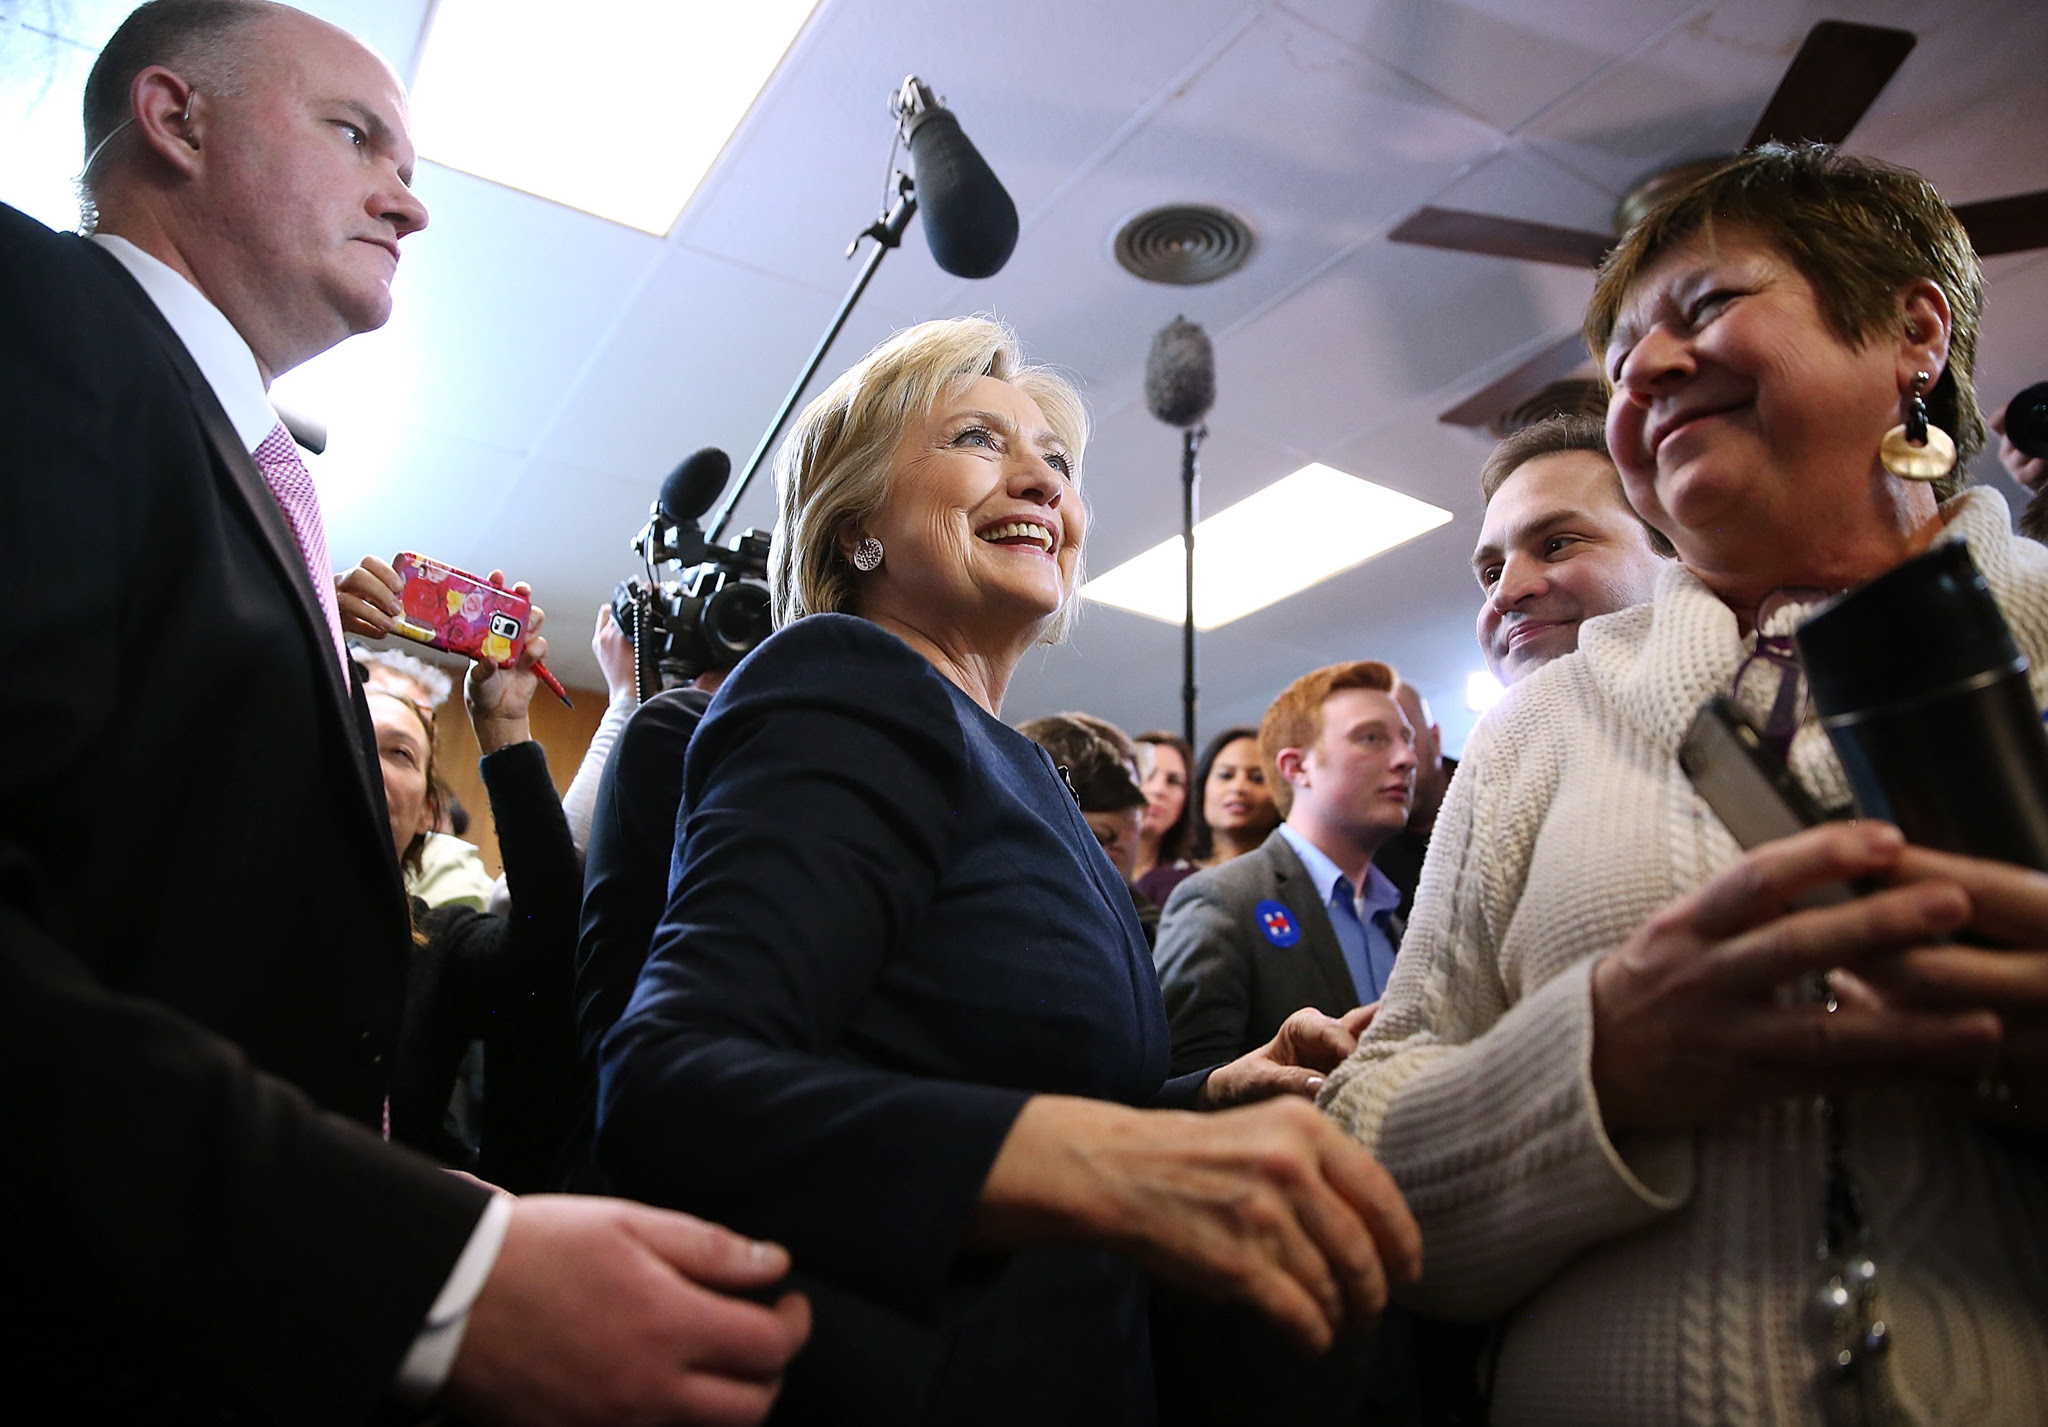 Hillary Clinton Holds Get Out The Caucus Event In Iowa...ADEL, IA - JANUARY 27:  Democratic presidential candidate former Secretary of State Hillary Clinton greets supporters during a "get out the caucus" event at the Adel Family Fun Center on January 27, 2016 in Adel, Iowa.  With less than a week to go before the Iowa caucuses, Hillary Clinton is campaigning throughout Iowa.  (Photo by Justin Sullivan/Getty Images)